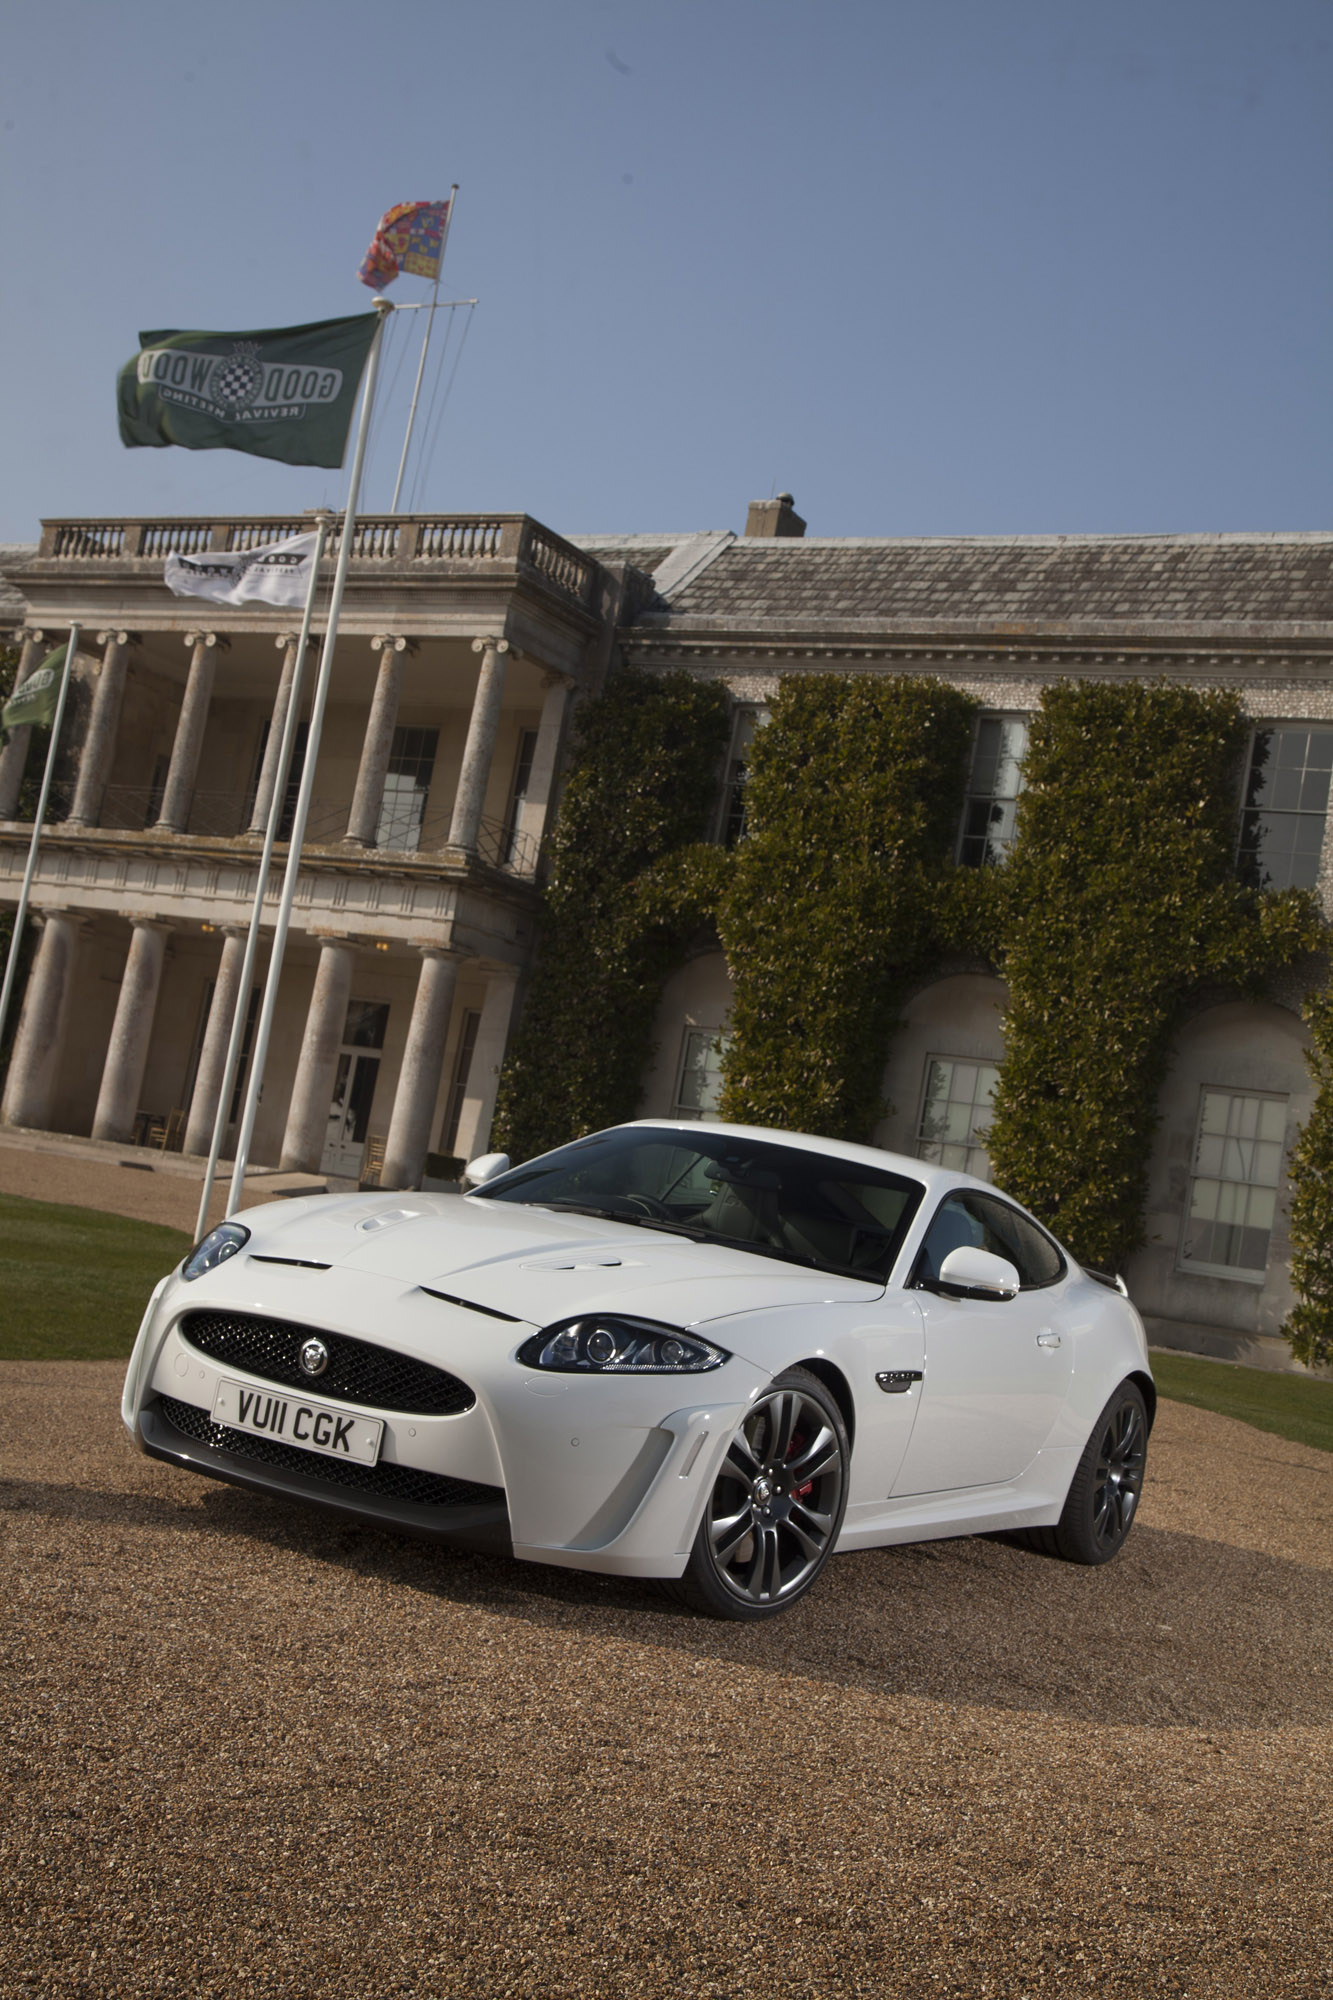 Jaguar at the  Goodwood Festival of Speed